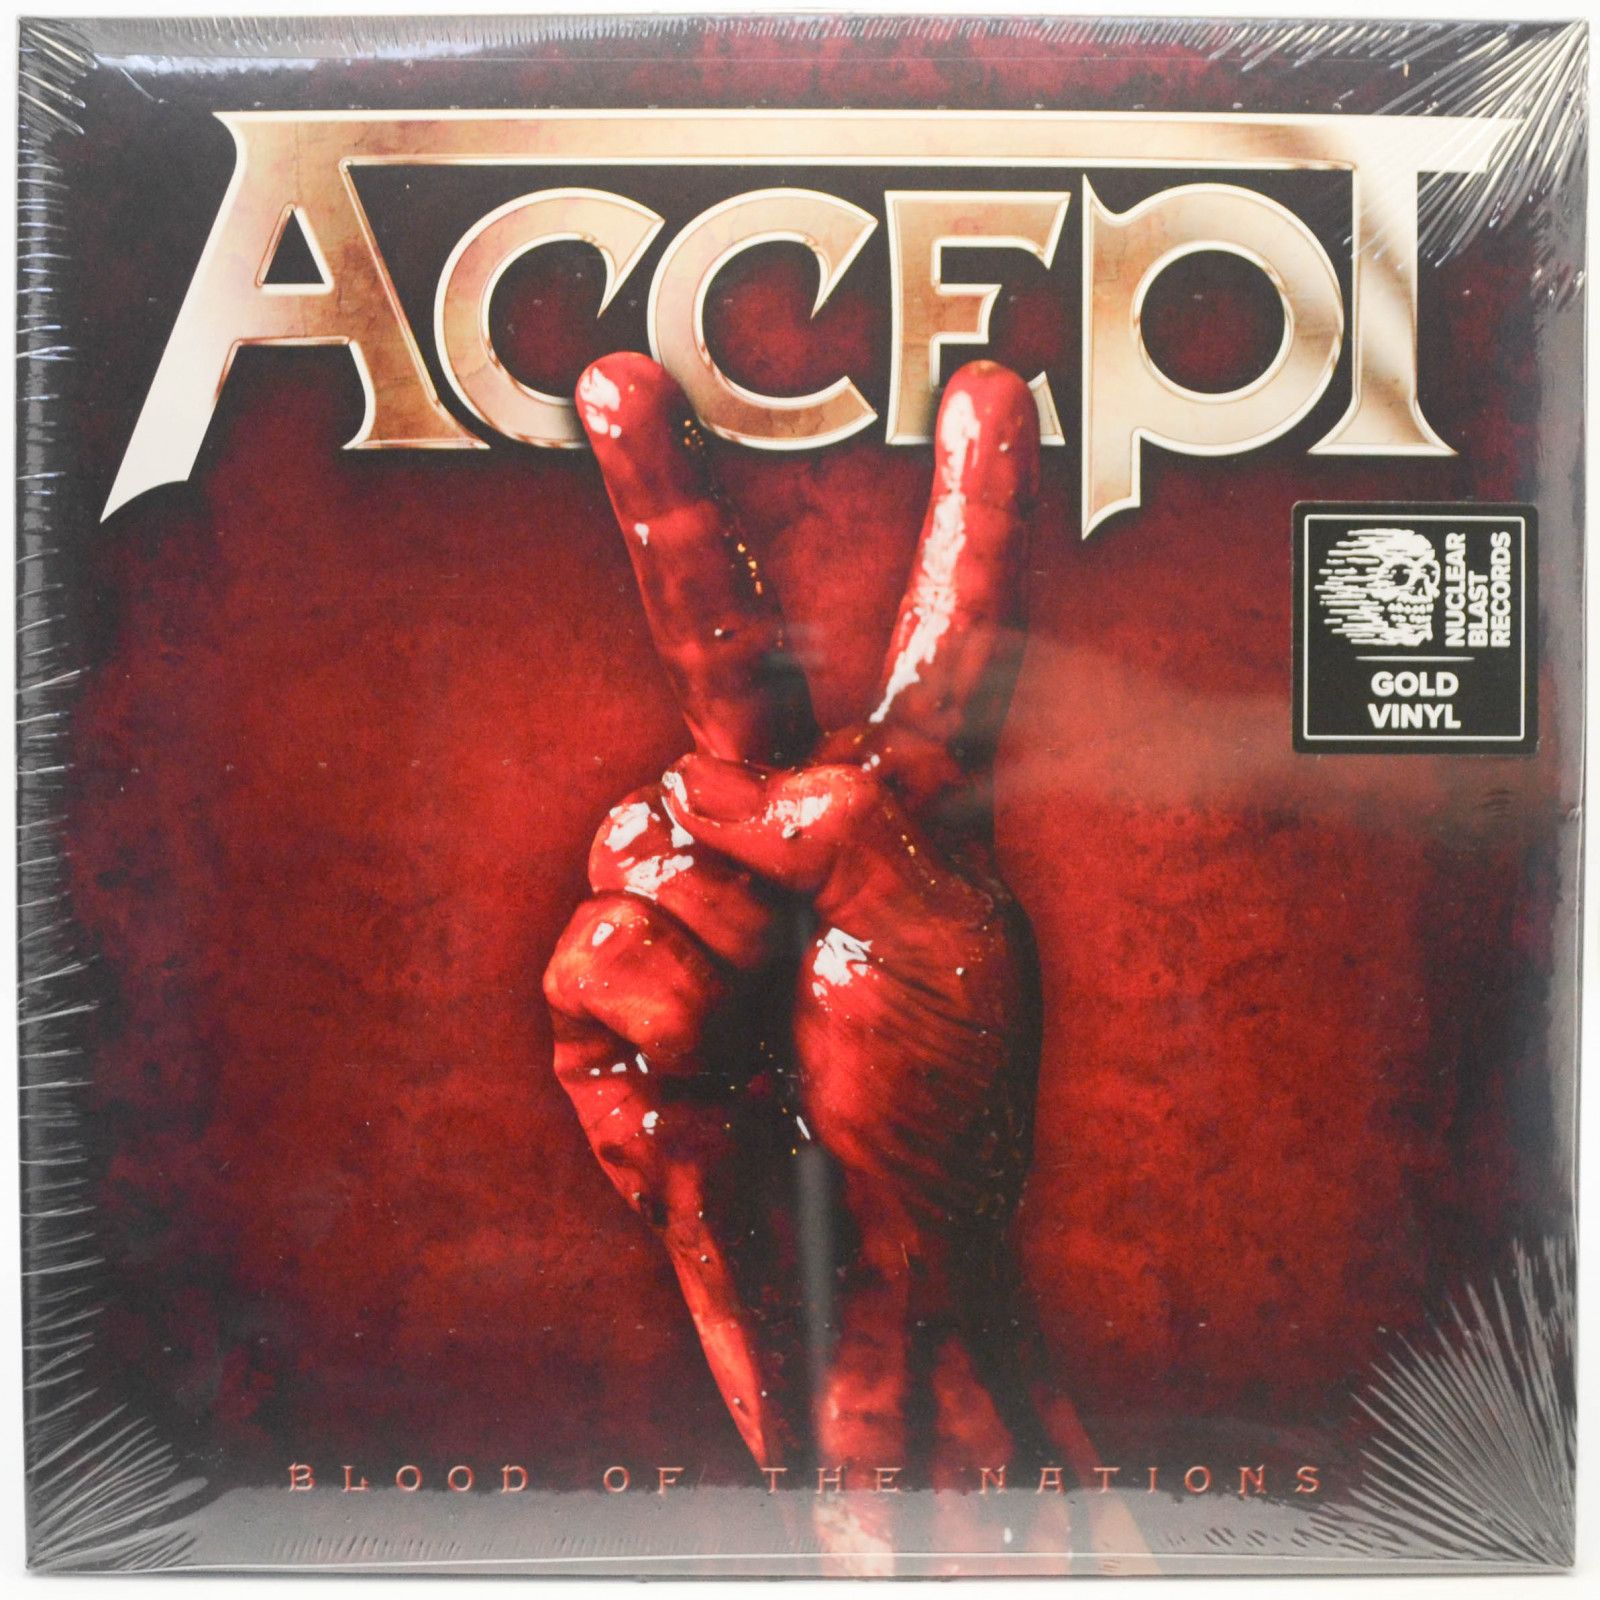 Accept — Blood Of The Nations (2LP), 2010